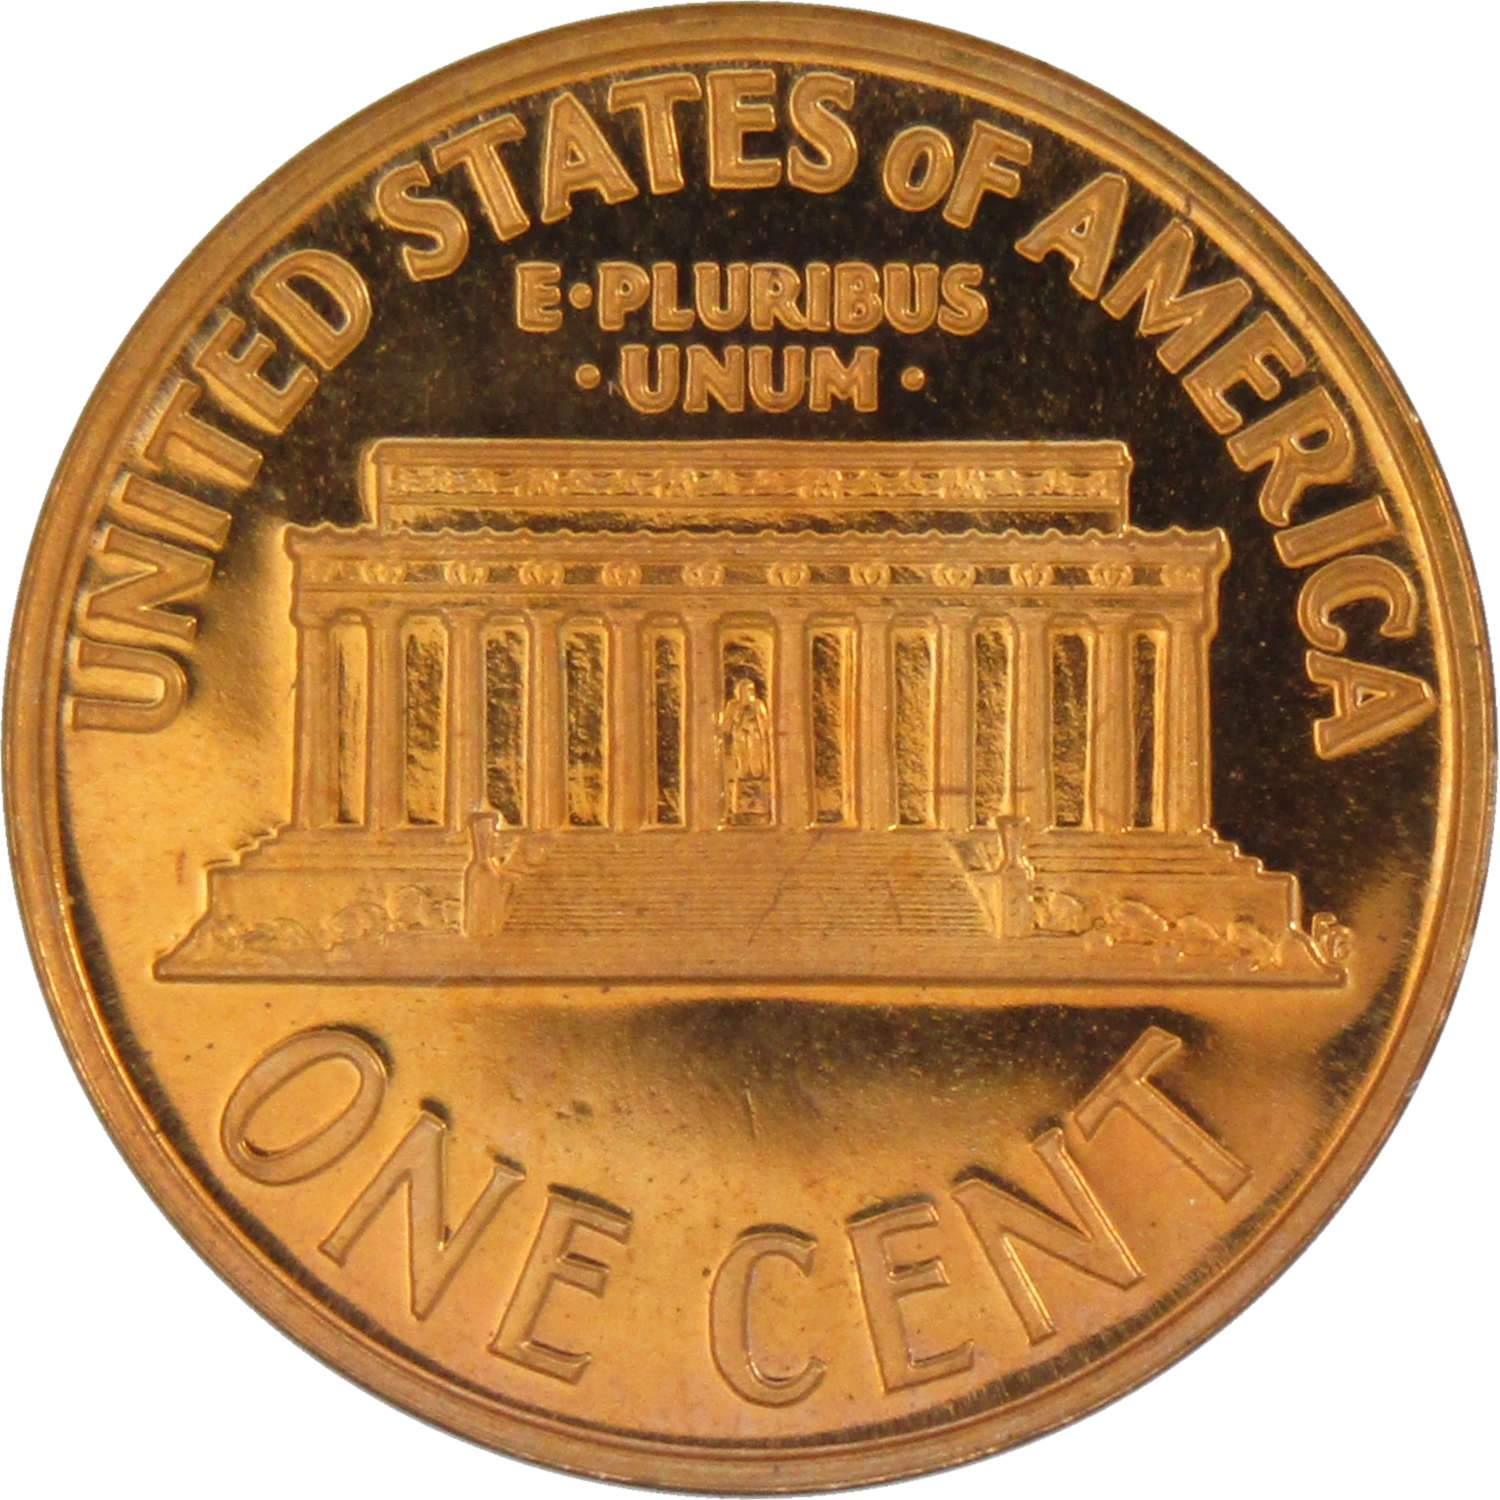 Coin: 1 Cent (Lincoln Memorial) (United States of America(B01a - Lincoln  Cent) WCC:km201b